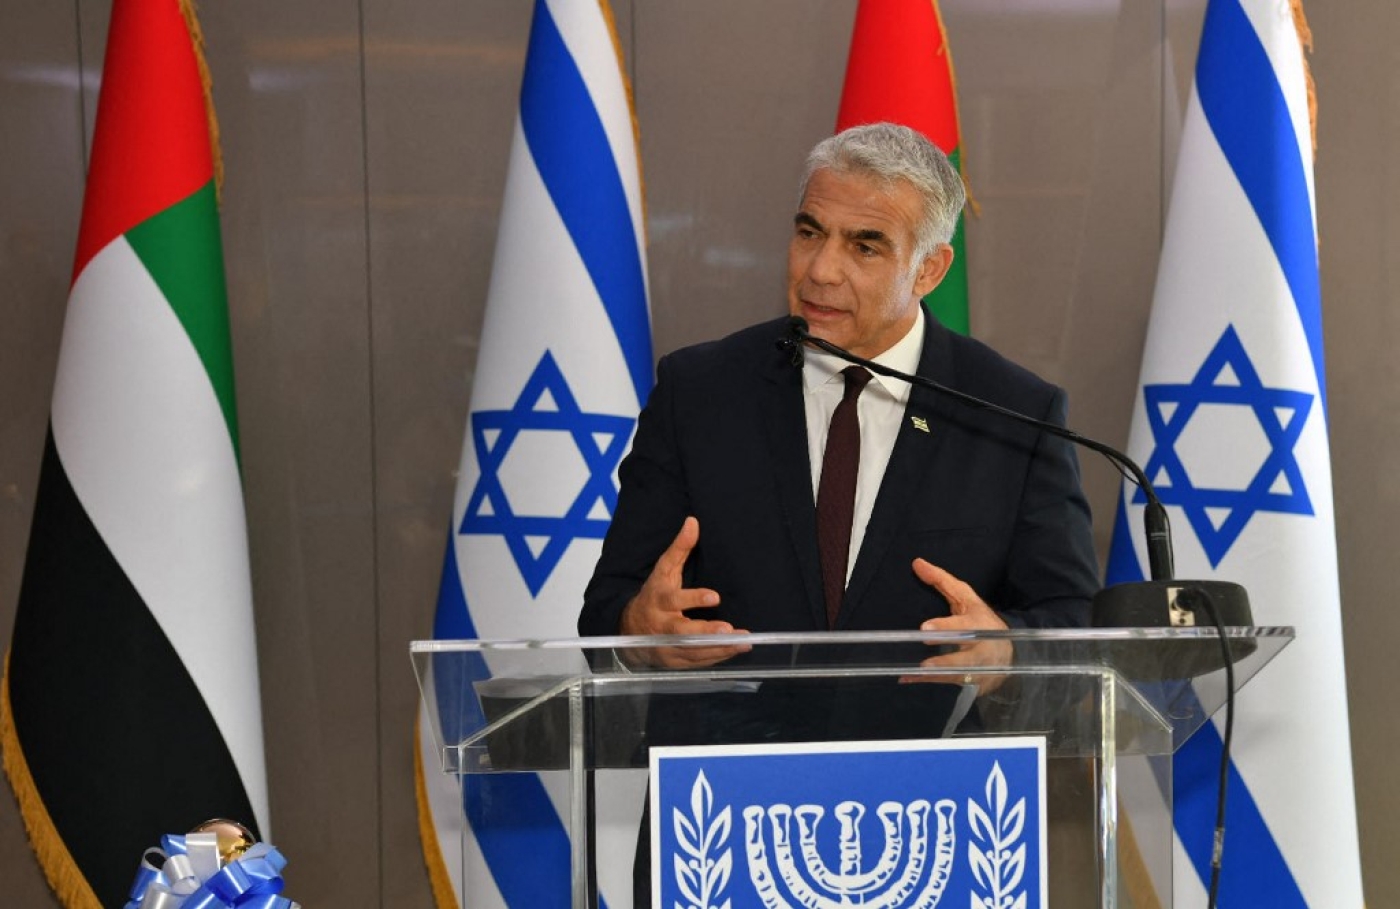 Israel's alternate Prime Minister and Foreign Minister Yair Lapid speaks at a press conference at the new Israeli consulate in Dubai on 30 June